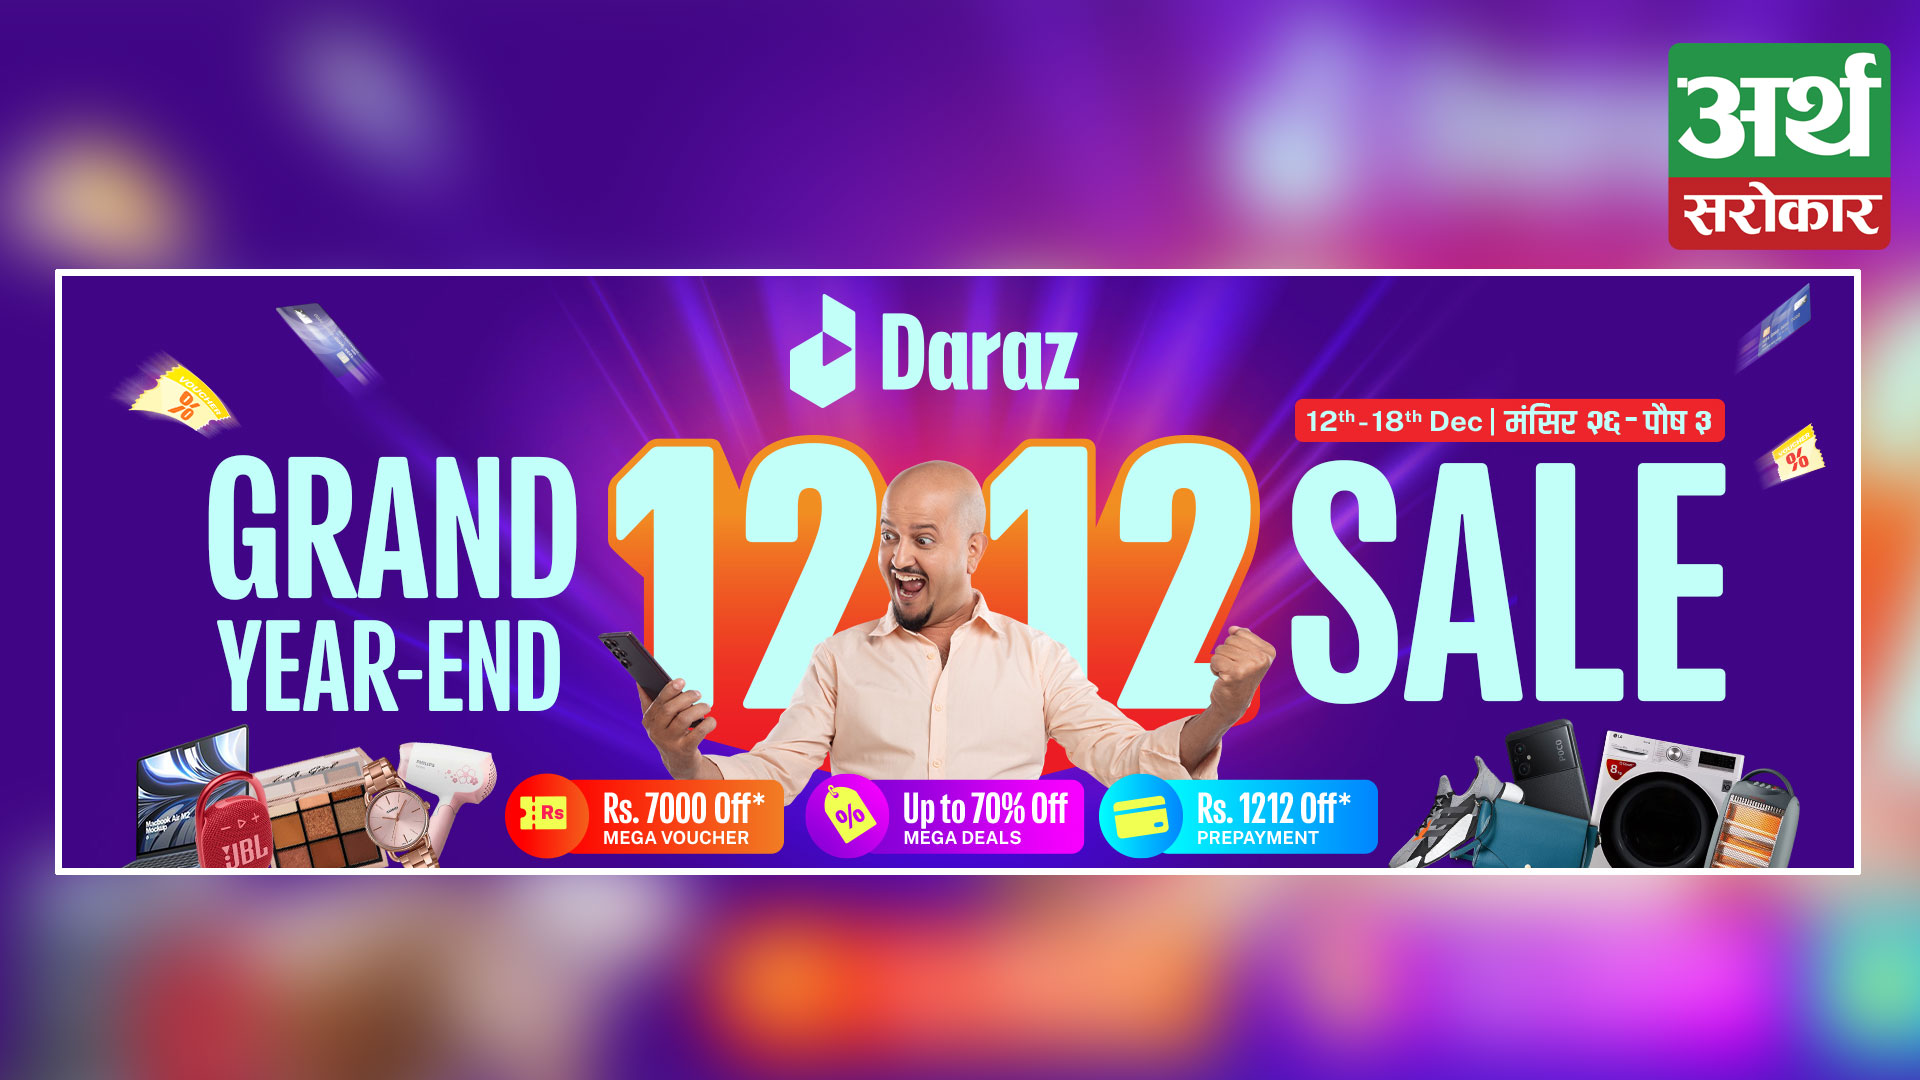 Know all about daraj 12.12 grand year-end sale, vouchers, mega deals, free shipping & more